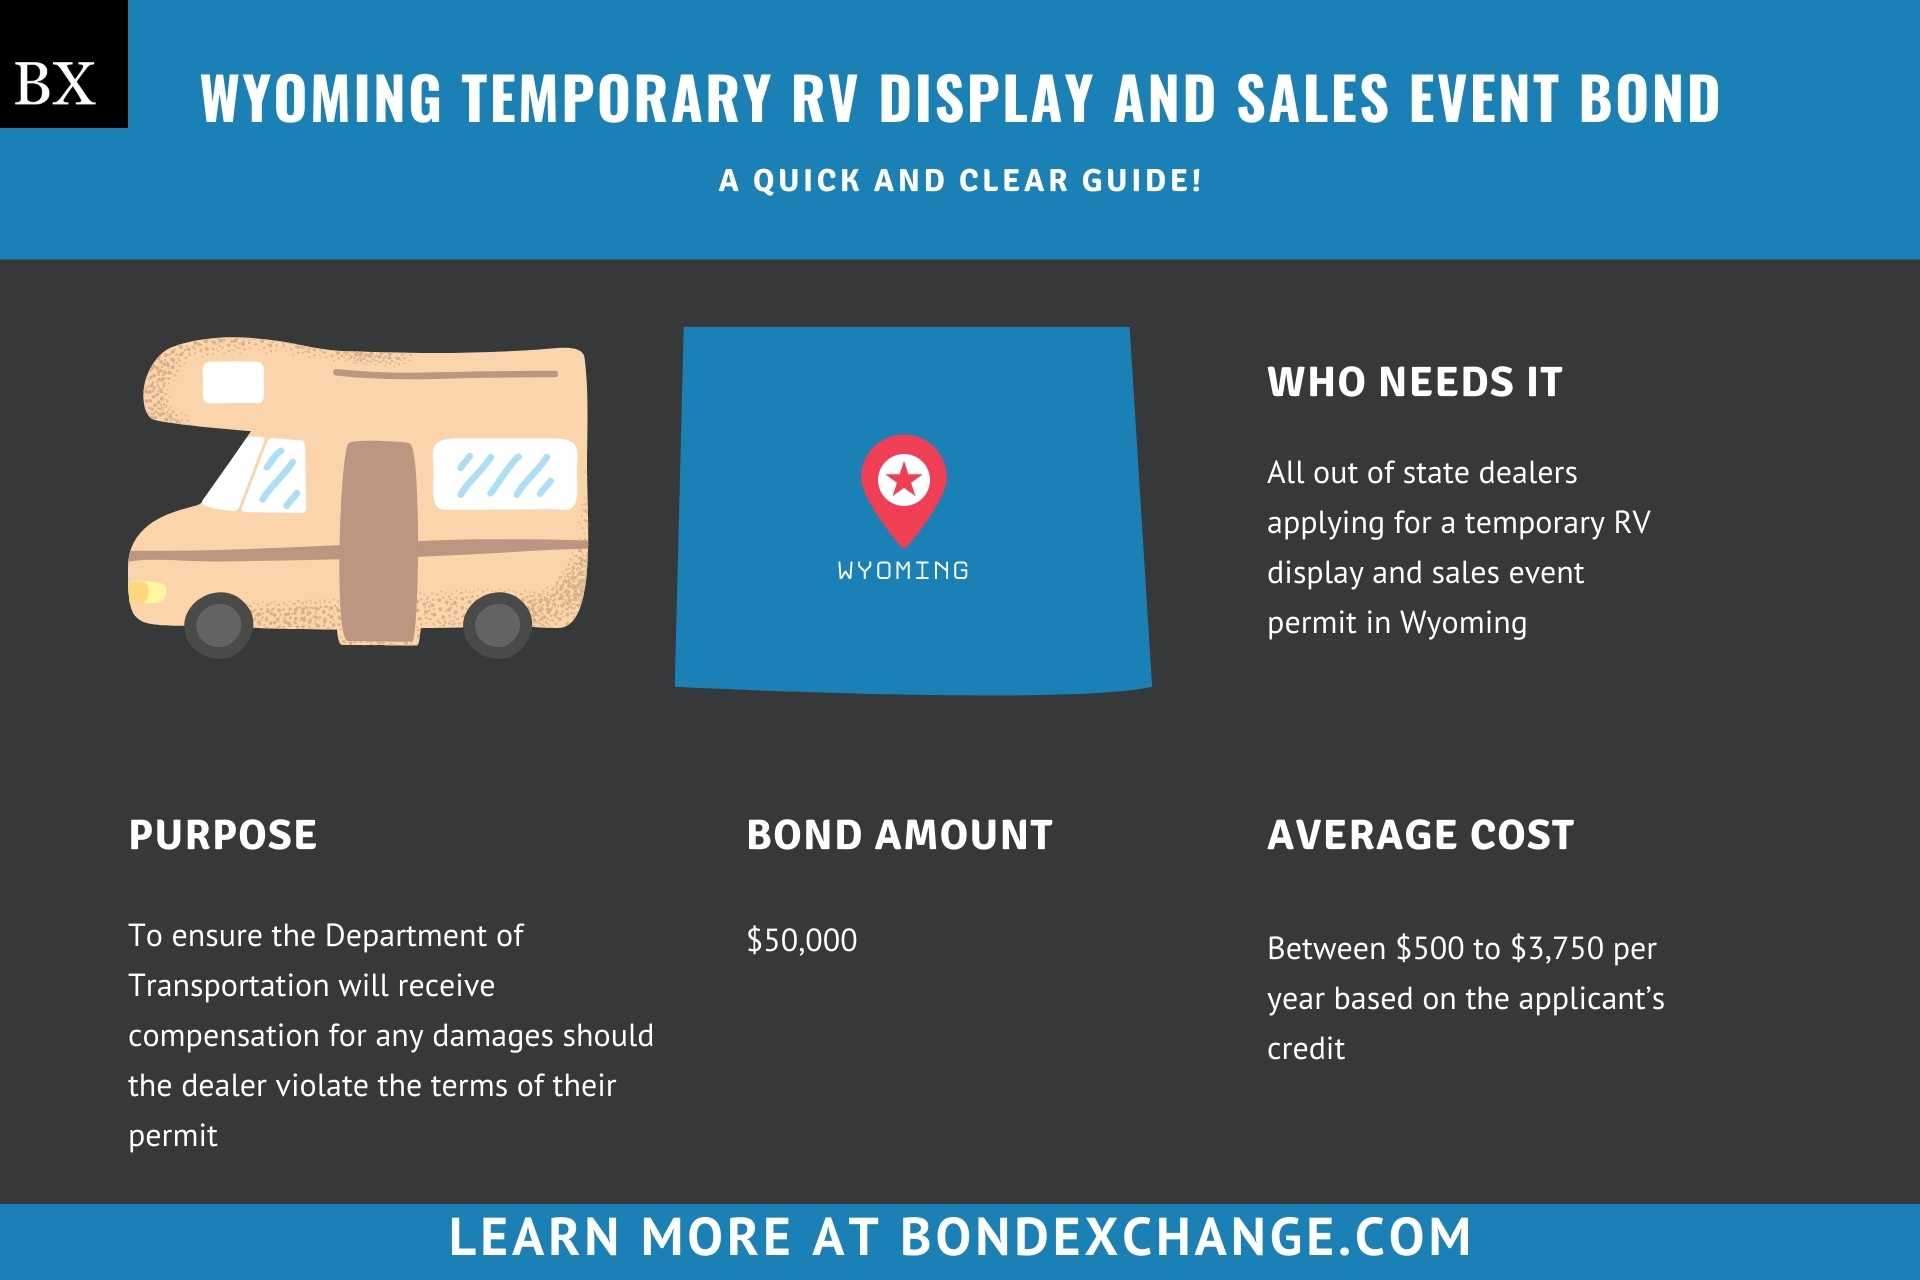 Wyoming Temporary RV Display and Sales Event Bond